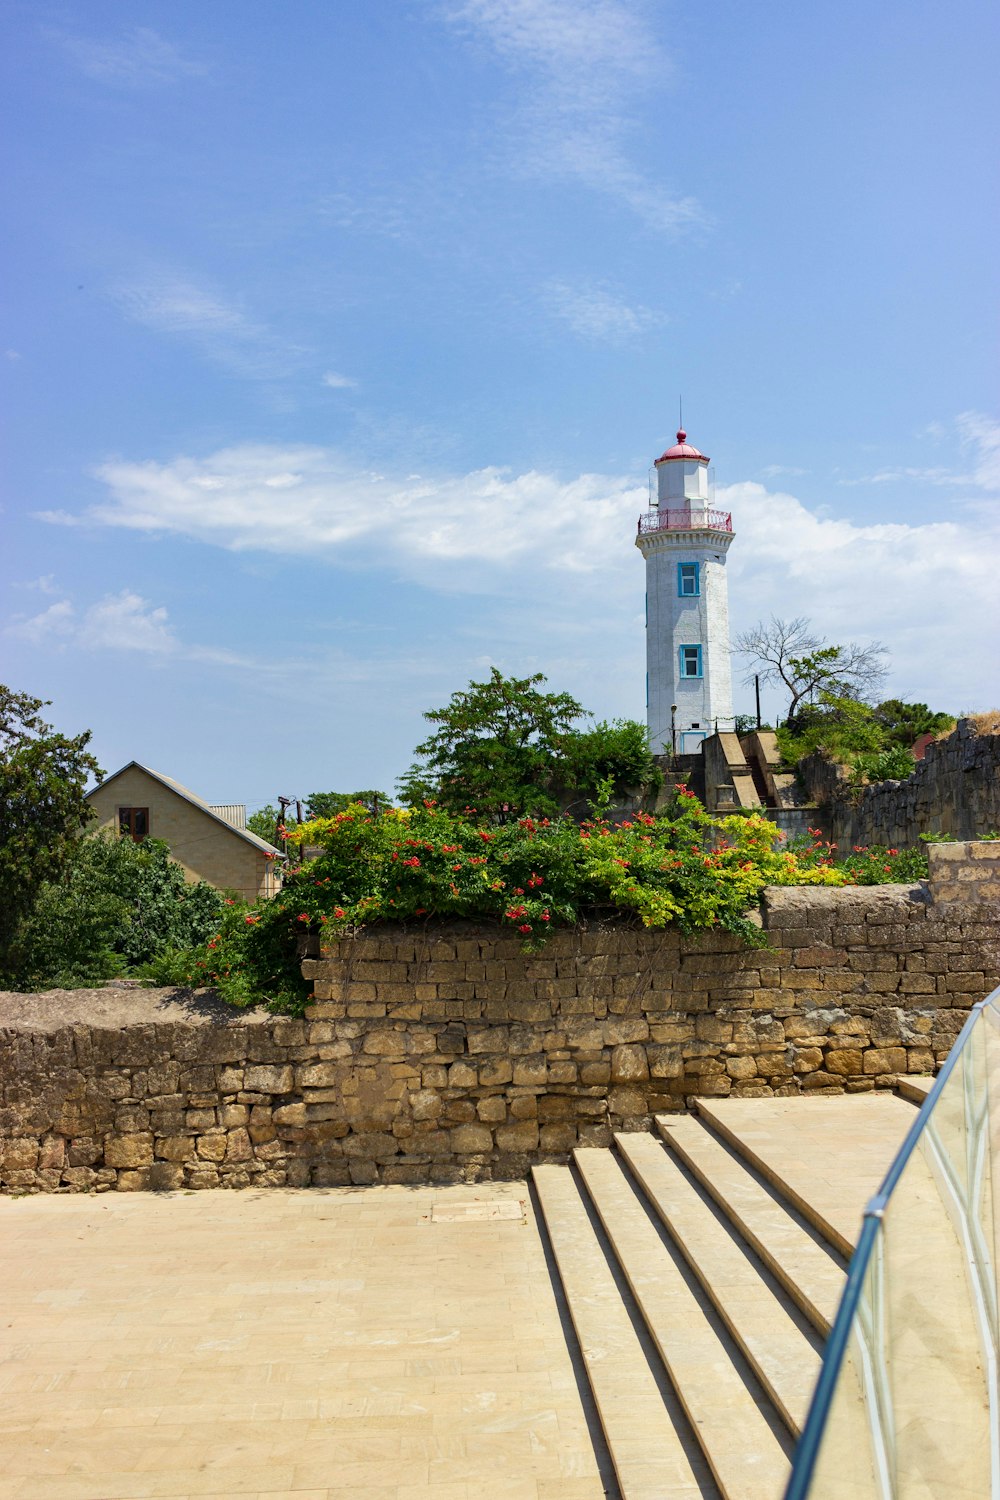 a light house sitting on top of a stone wall